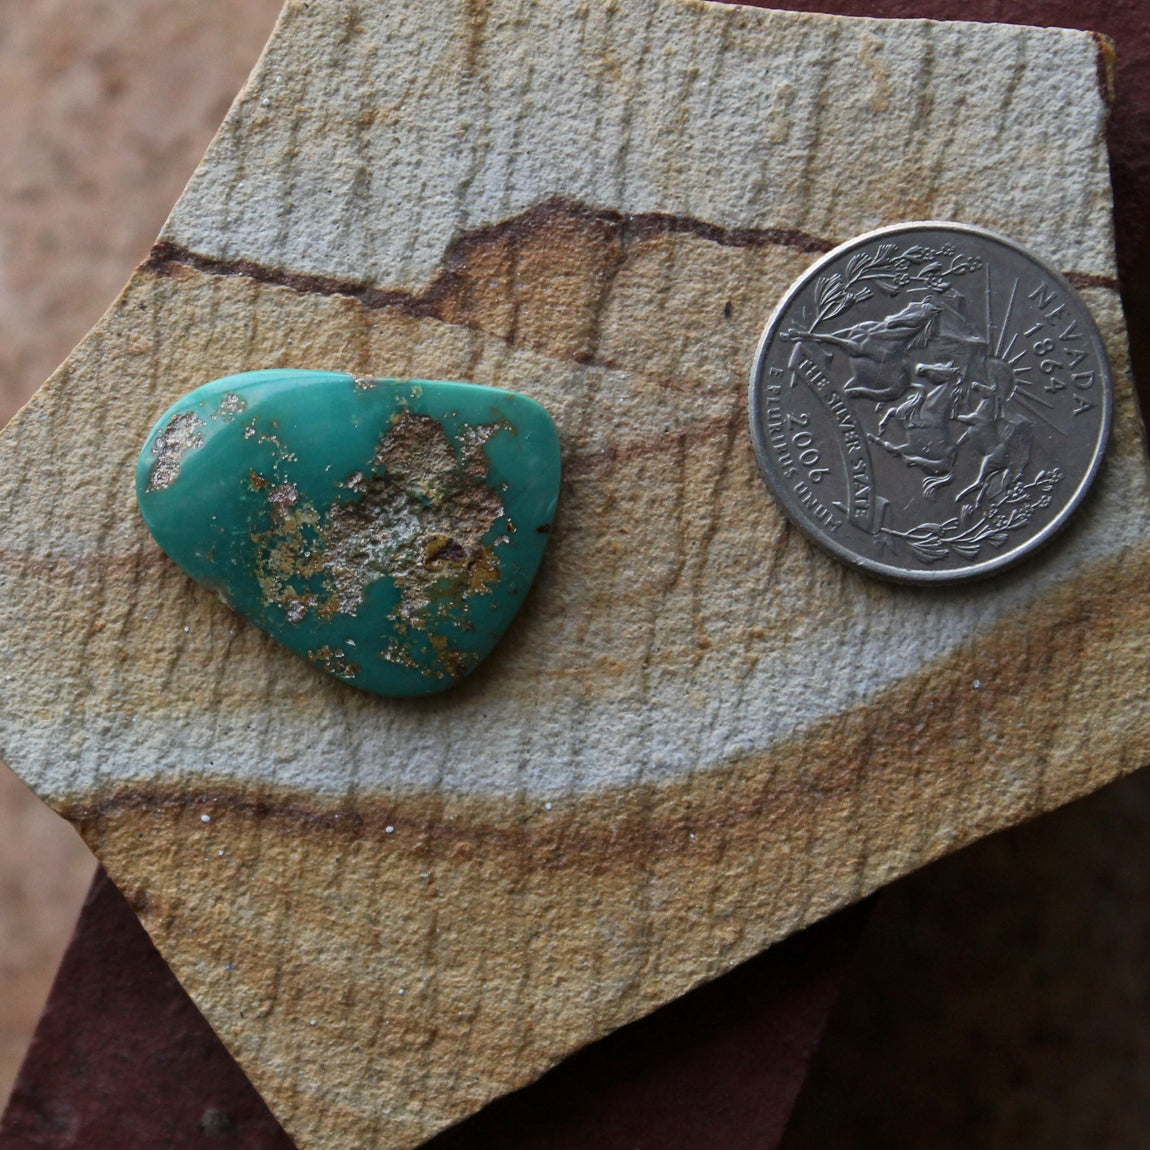 16 carat green Stone Mountain Turquoise cabochon